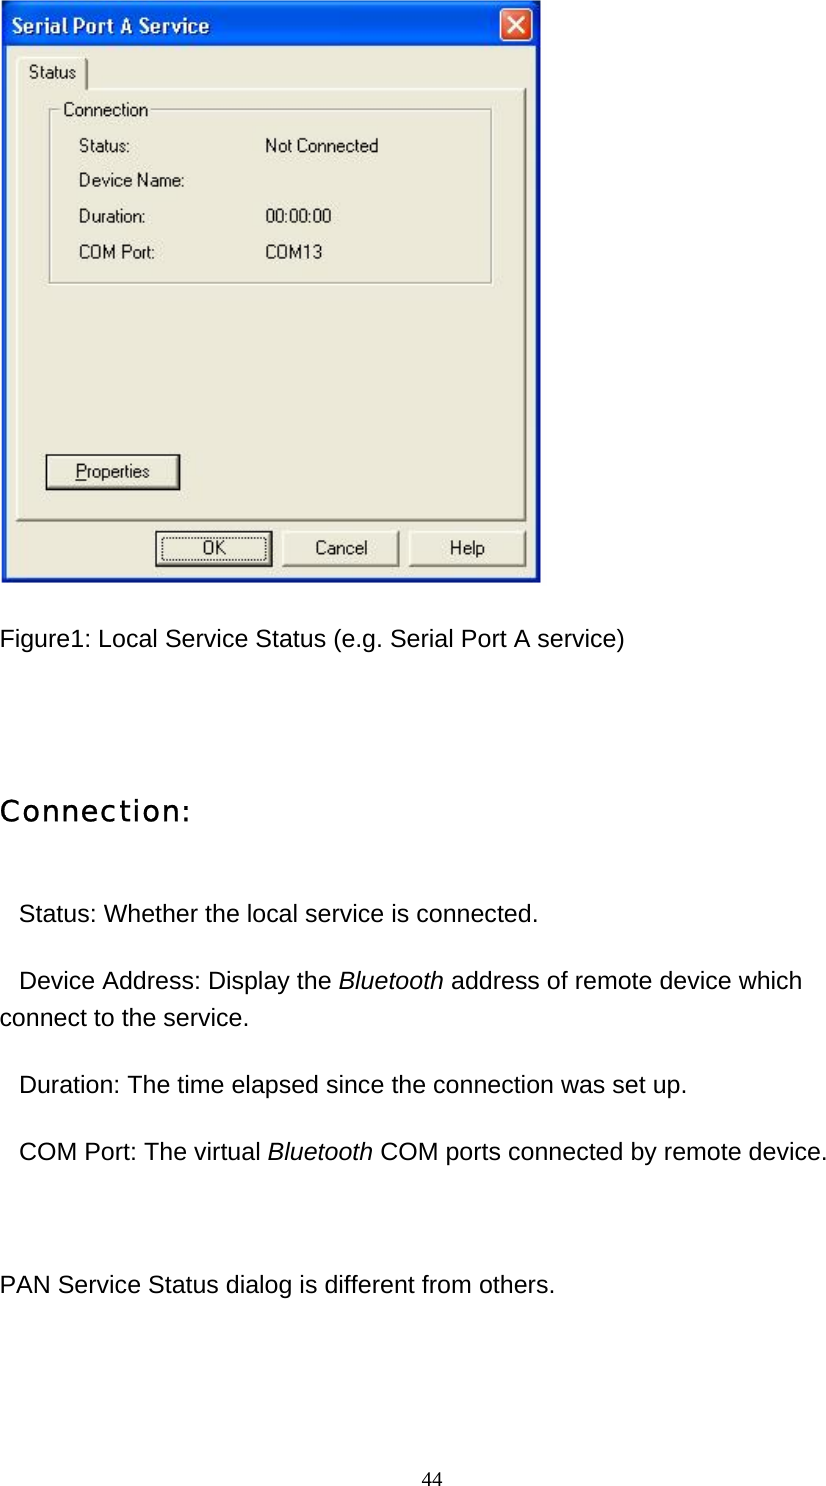   44 Figure1: Local Service Status (e.g. Serial Port A service)   Connection:    Status: Whether the local service is connected.    Device Address: Display the Bluetooth address of remote device which connect to the service.    Duration: The time elapsed since the connection was set up.    COM Port: The virtual Bluetooth COM ports connected by remote device.      PAN Service Status dialog is different from others. 